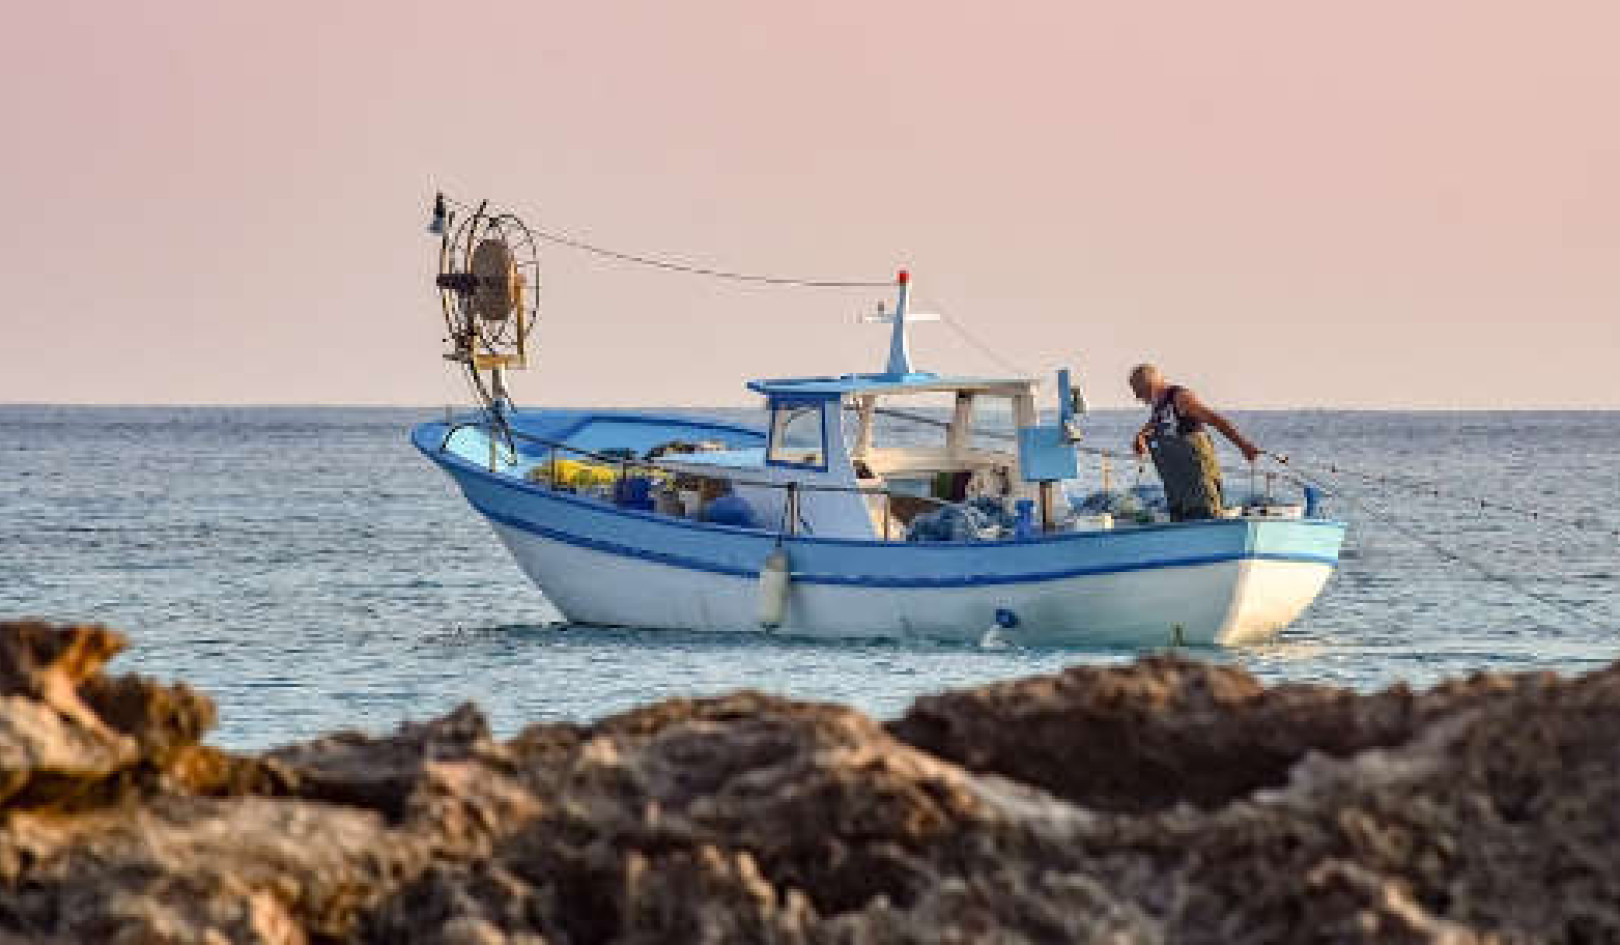 Protect Fish To Increase Catches − And Cut Carbon